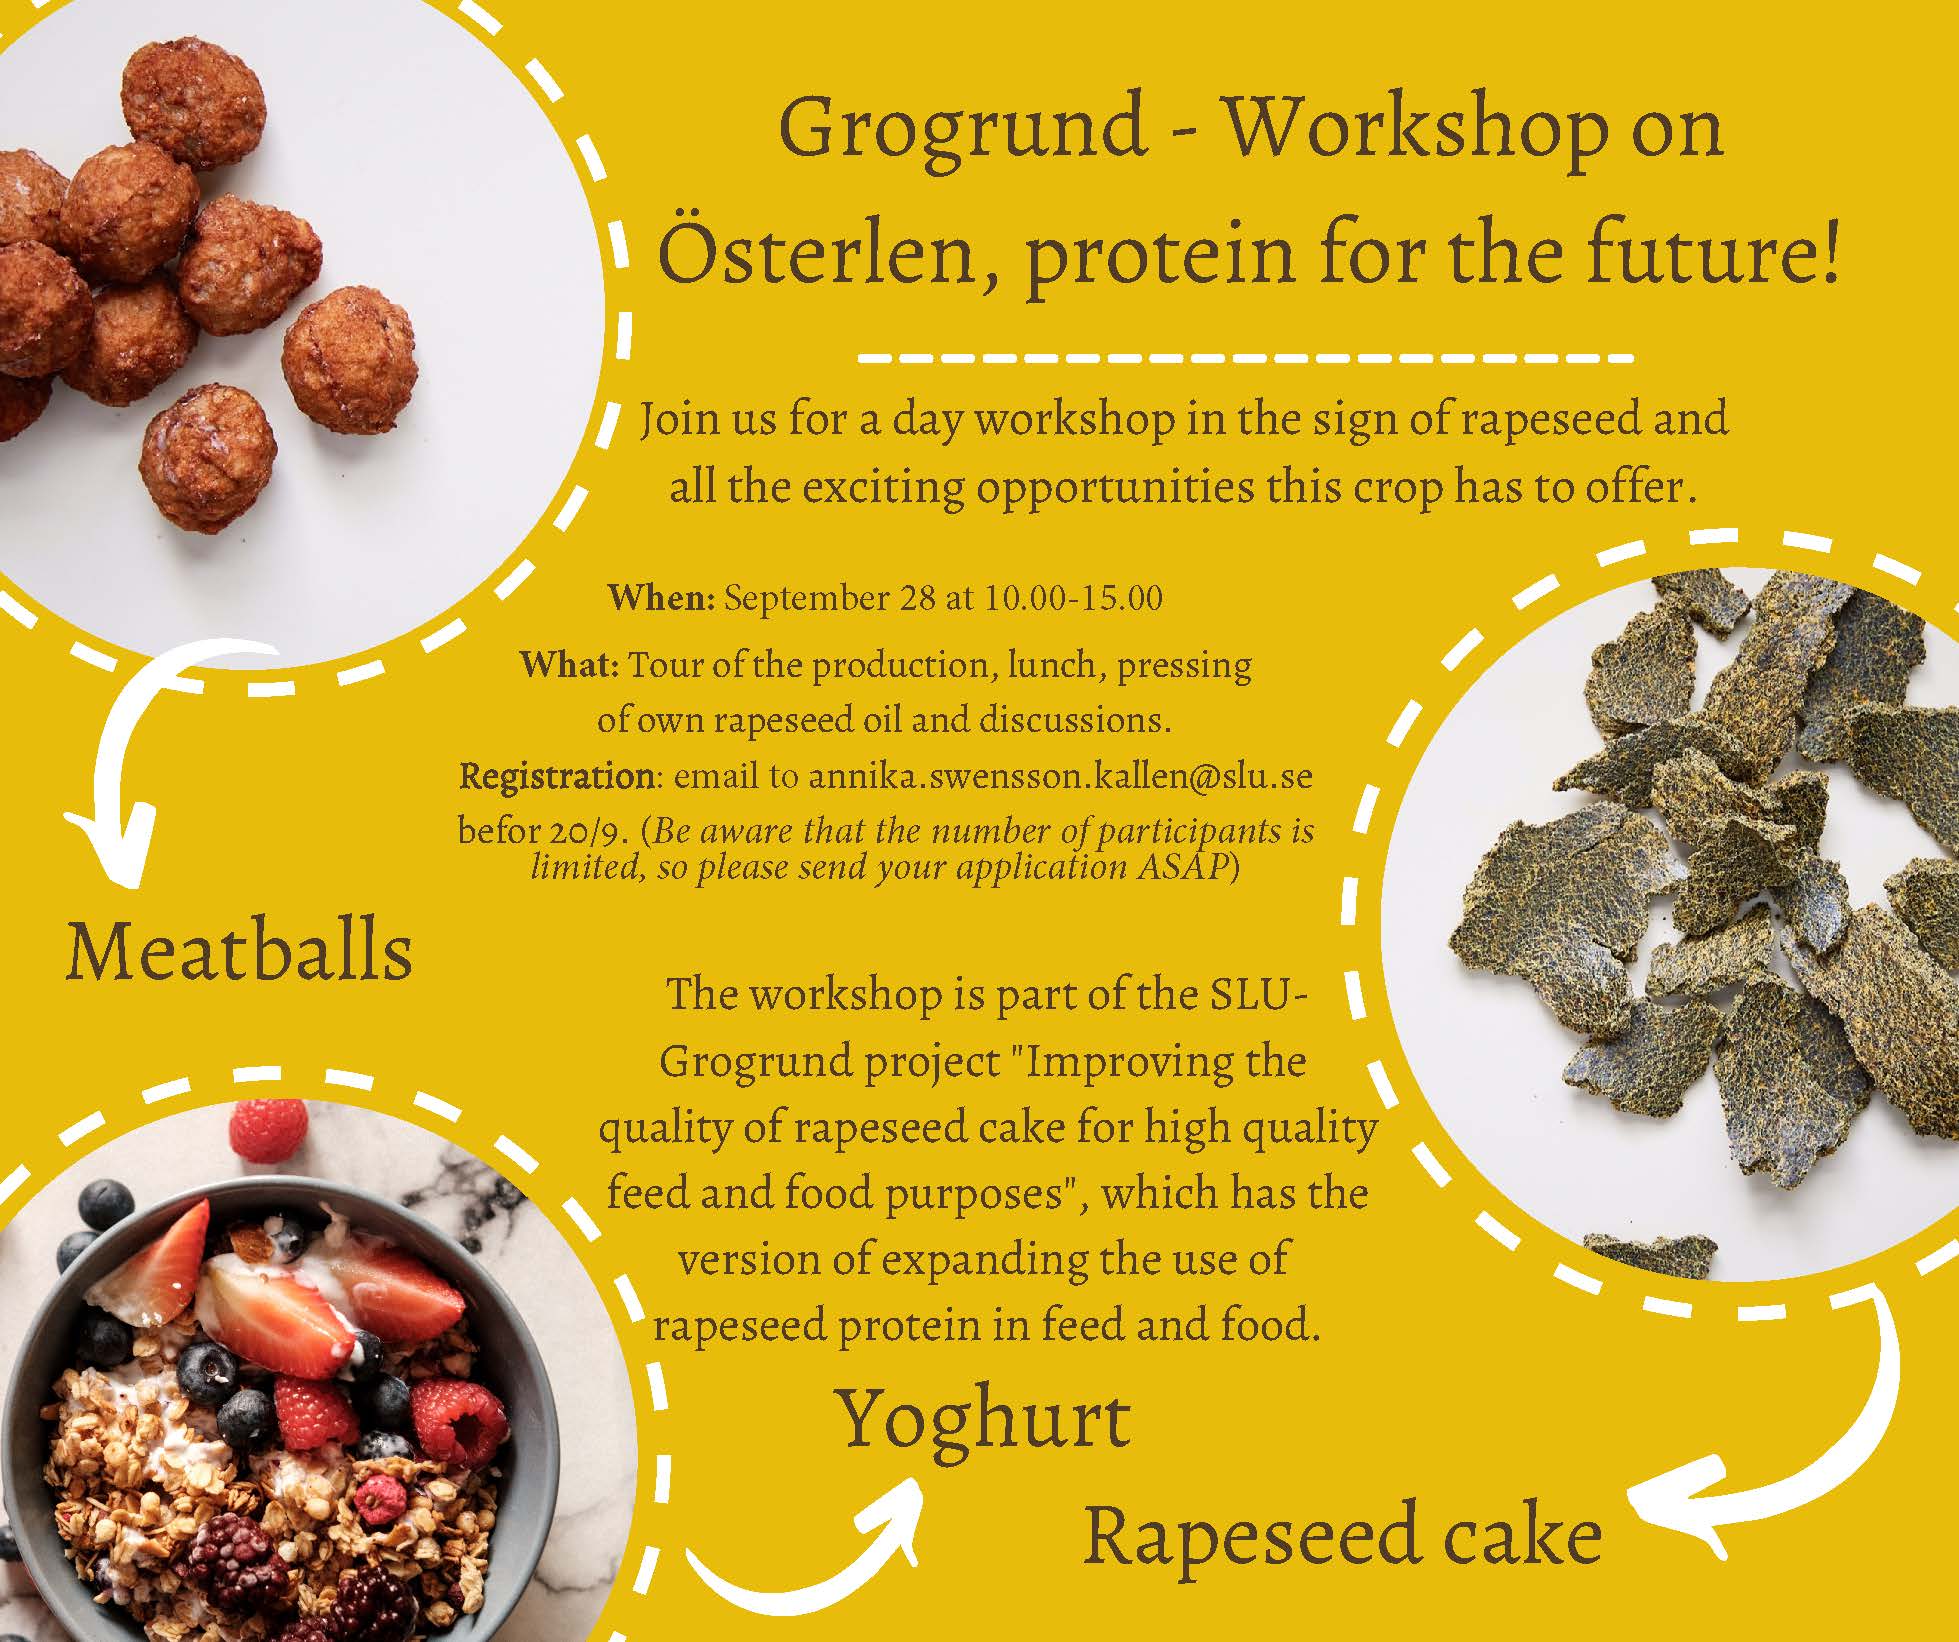 Grogrund - Workshop on Österlen, protein for the future! Meatballs Rapeseed cake Yoghurt Join us for a day workshop in the sign of rapeseed and all the exciting opportunities this crop has to offer. When: September 28 at 10.00-15.00 What: Tour of the production, lunch, pressing of own rapeseed oil and discussions. Registration: email to annika.swensson.kallen@slu.se before 20/9. (Be aware that the number of participants is limited, so please send your application ASAP) The workshop is part of the SLUGrogrund project "Improving the quality of rapeseed cake for high quality feed and food purposes", which has the version of expanding the use of rapeseed protein in feed and food.